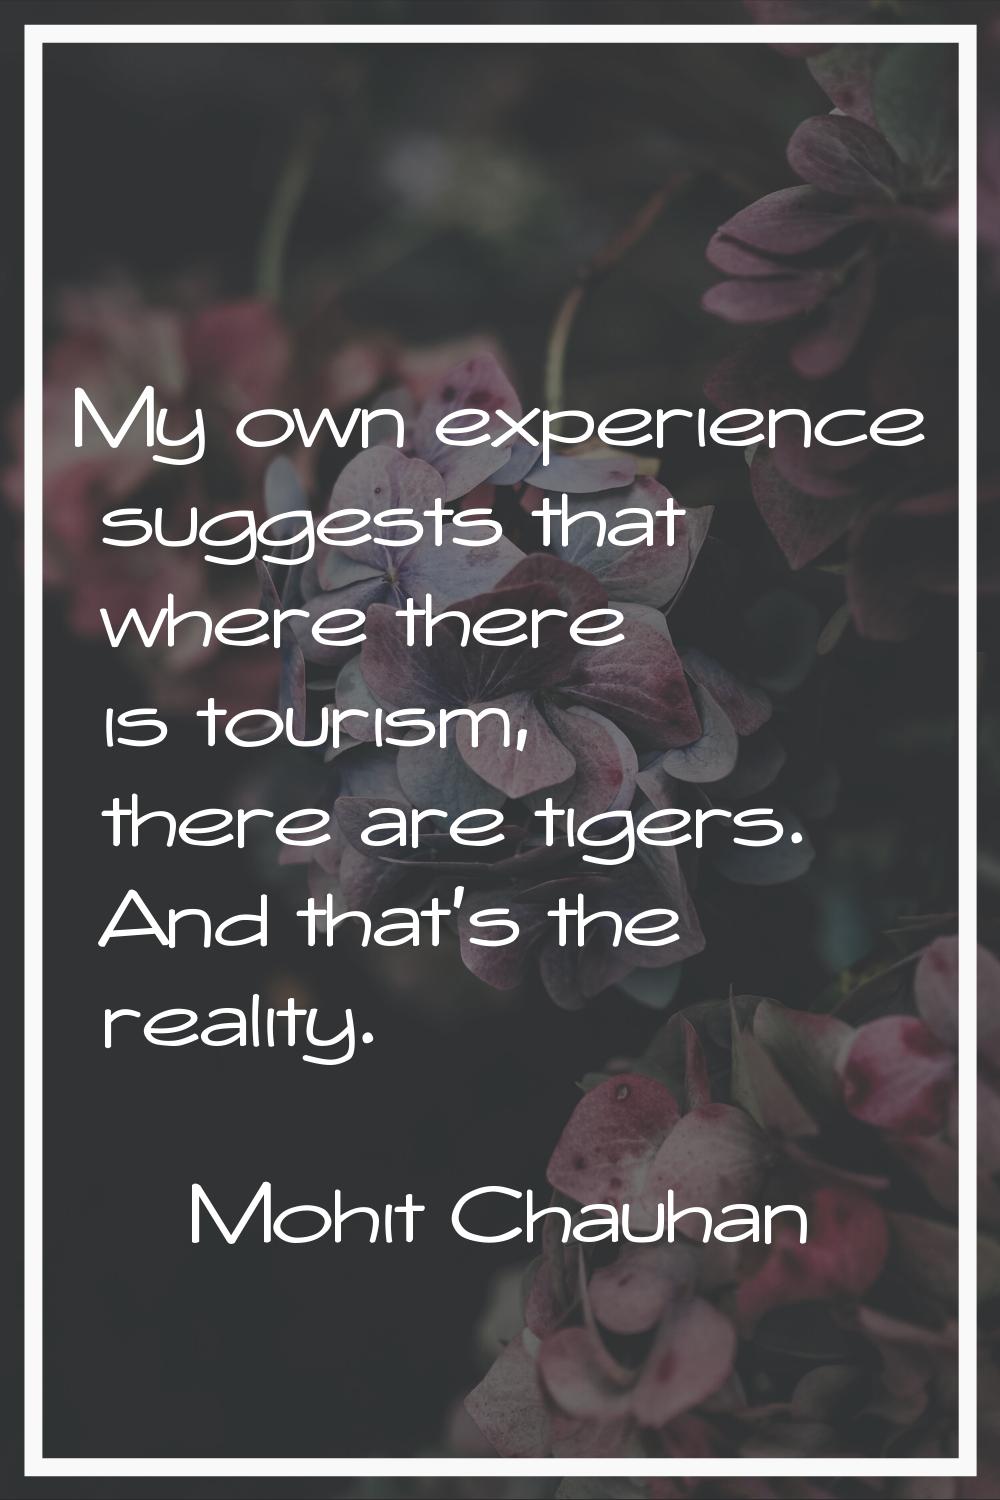 My own experience suggests that where there is tourism, there are tigers. And that's the reality.